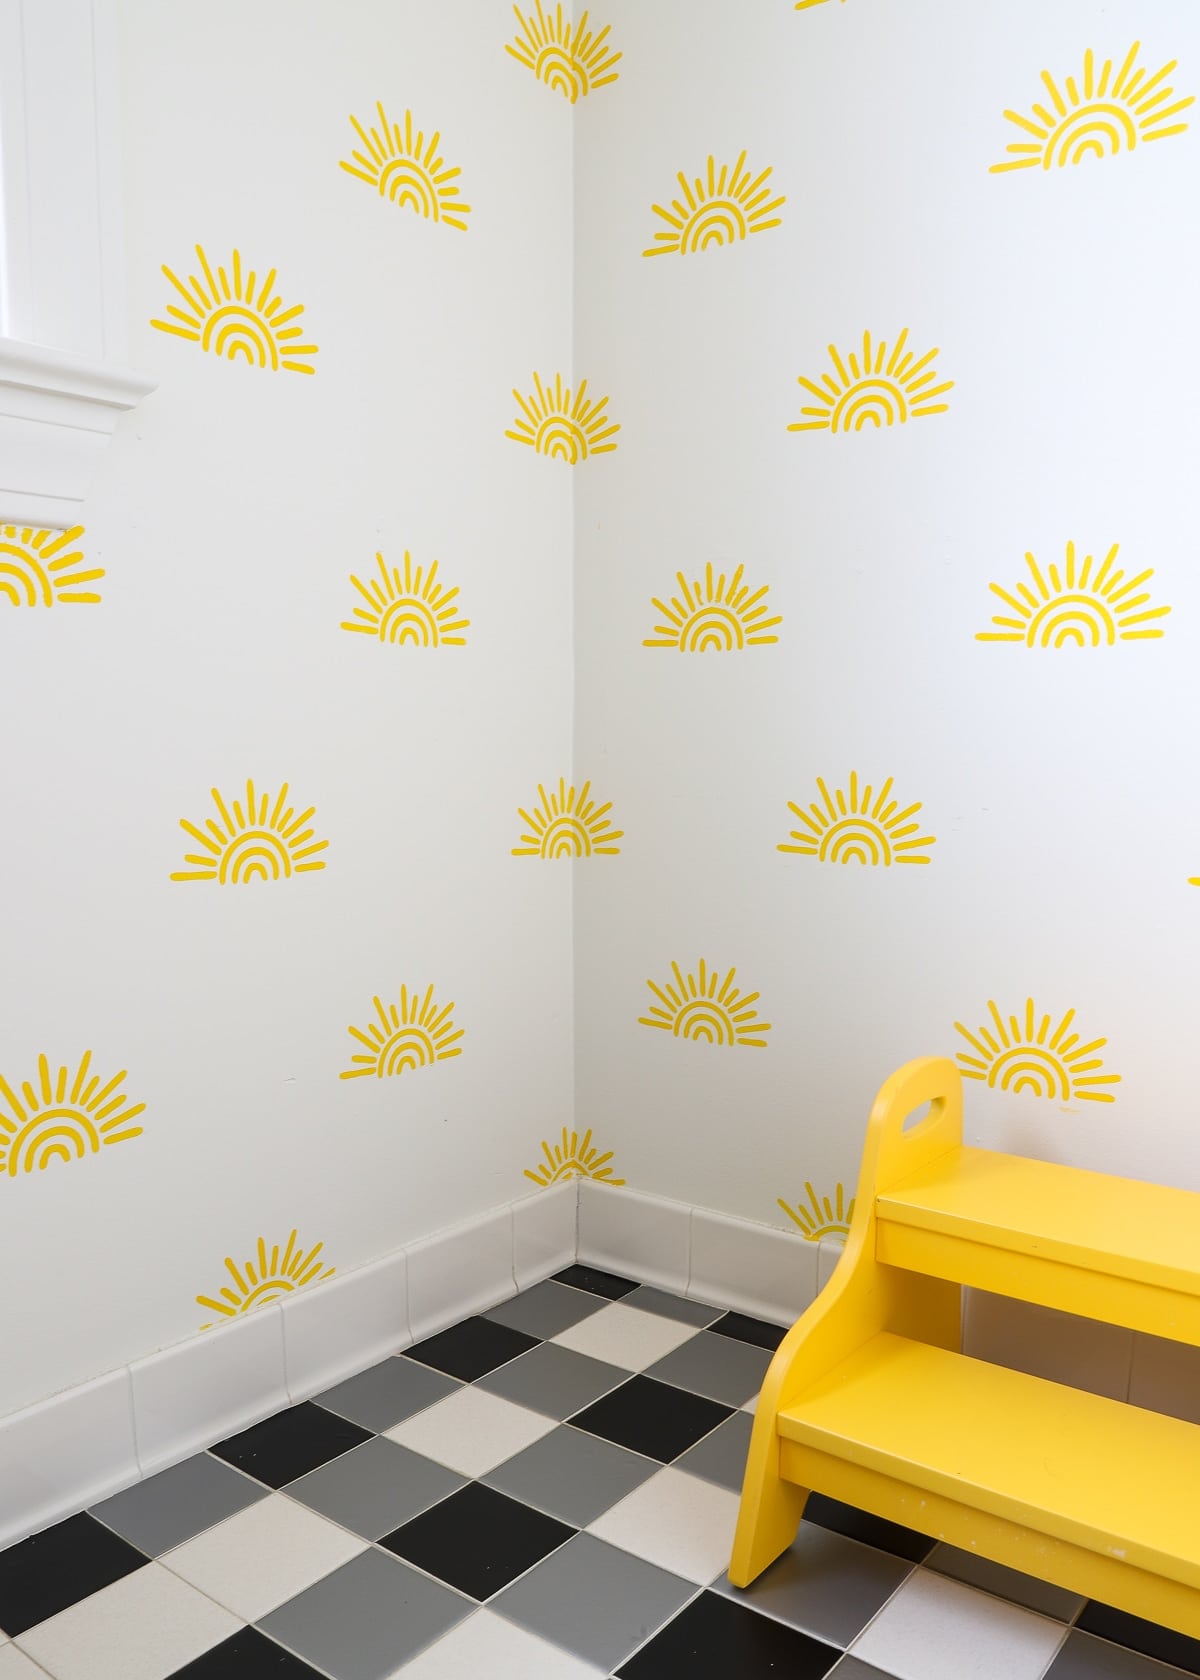 Black and grey floor stickers in a bathroom with sunshines on the wall